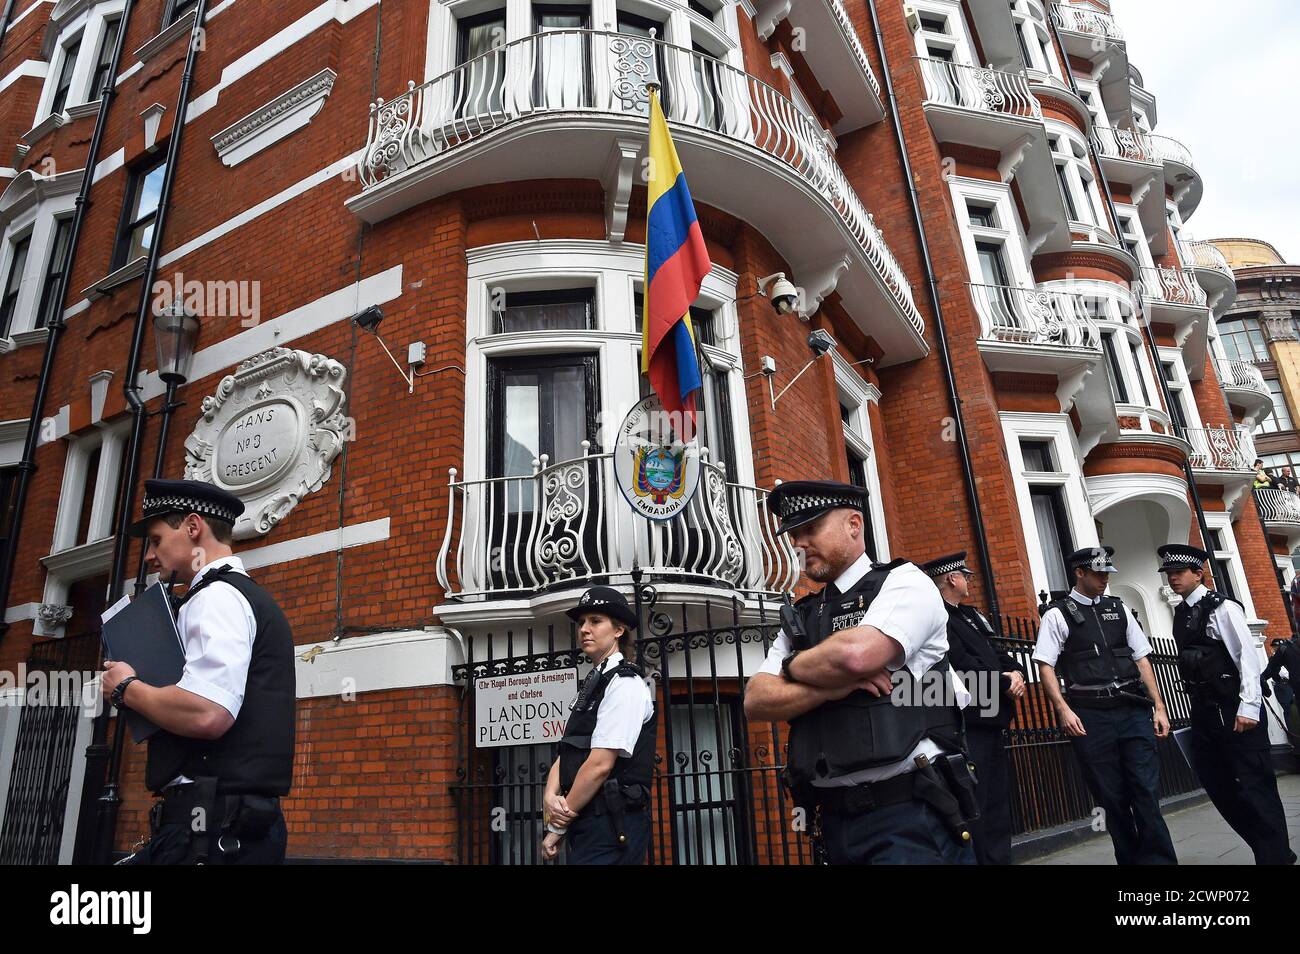 Police stand guard during a news conference by WikiLeaks founder Julian Assange at the Ecuadorian embassy in central London August 18, 2014.     REUTERS/Toby Melville (BRITAIN  - Tags: CRIME LAW POLITICS TPX IMAGES OF THE DAY) Stock Photo